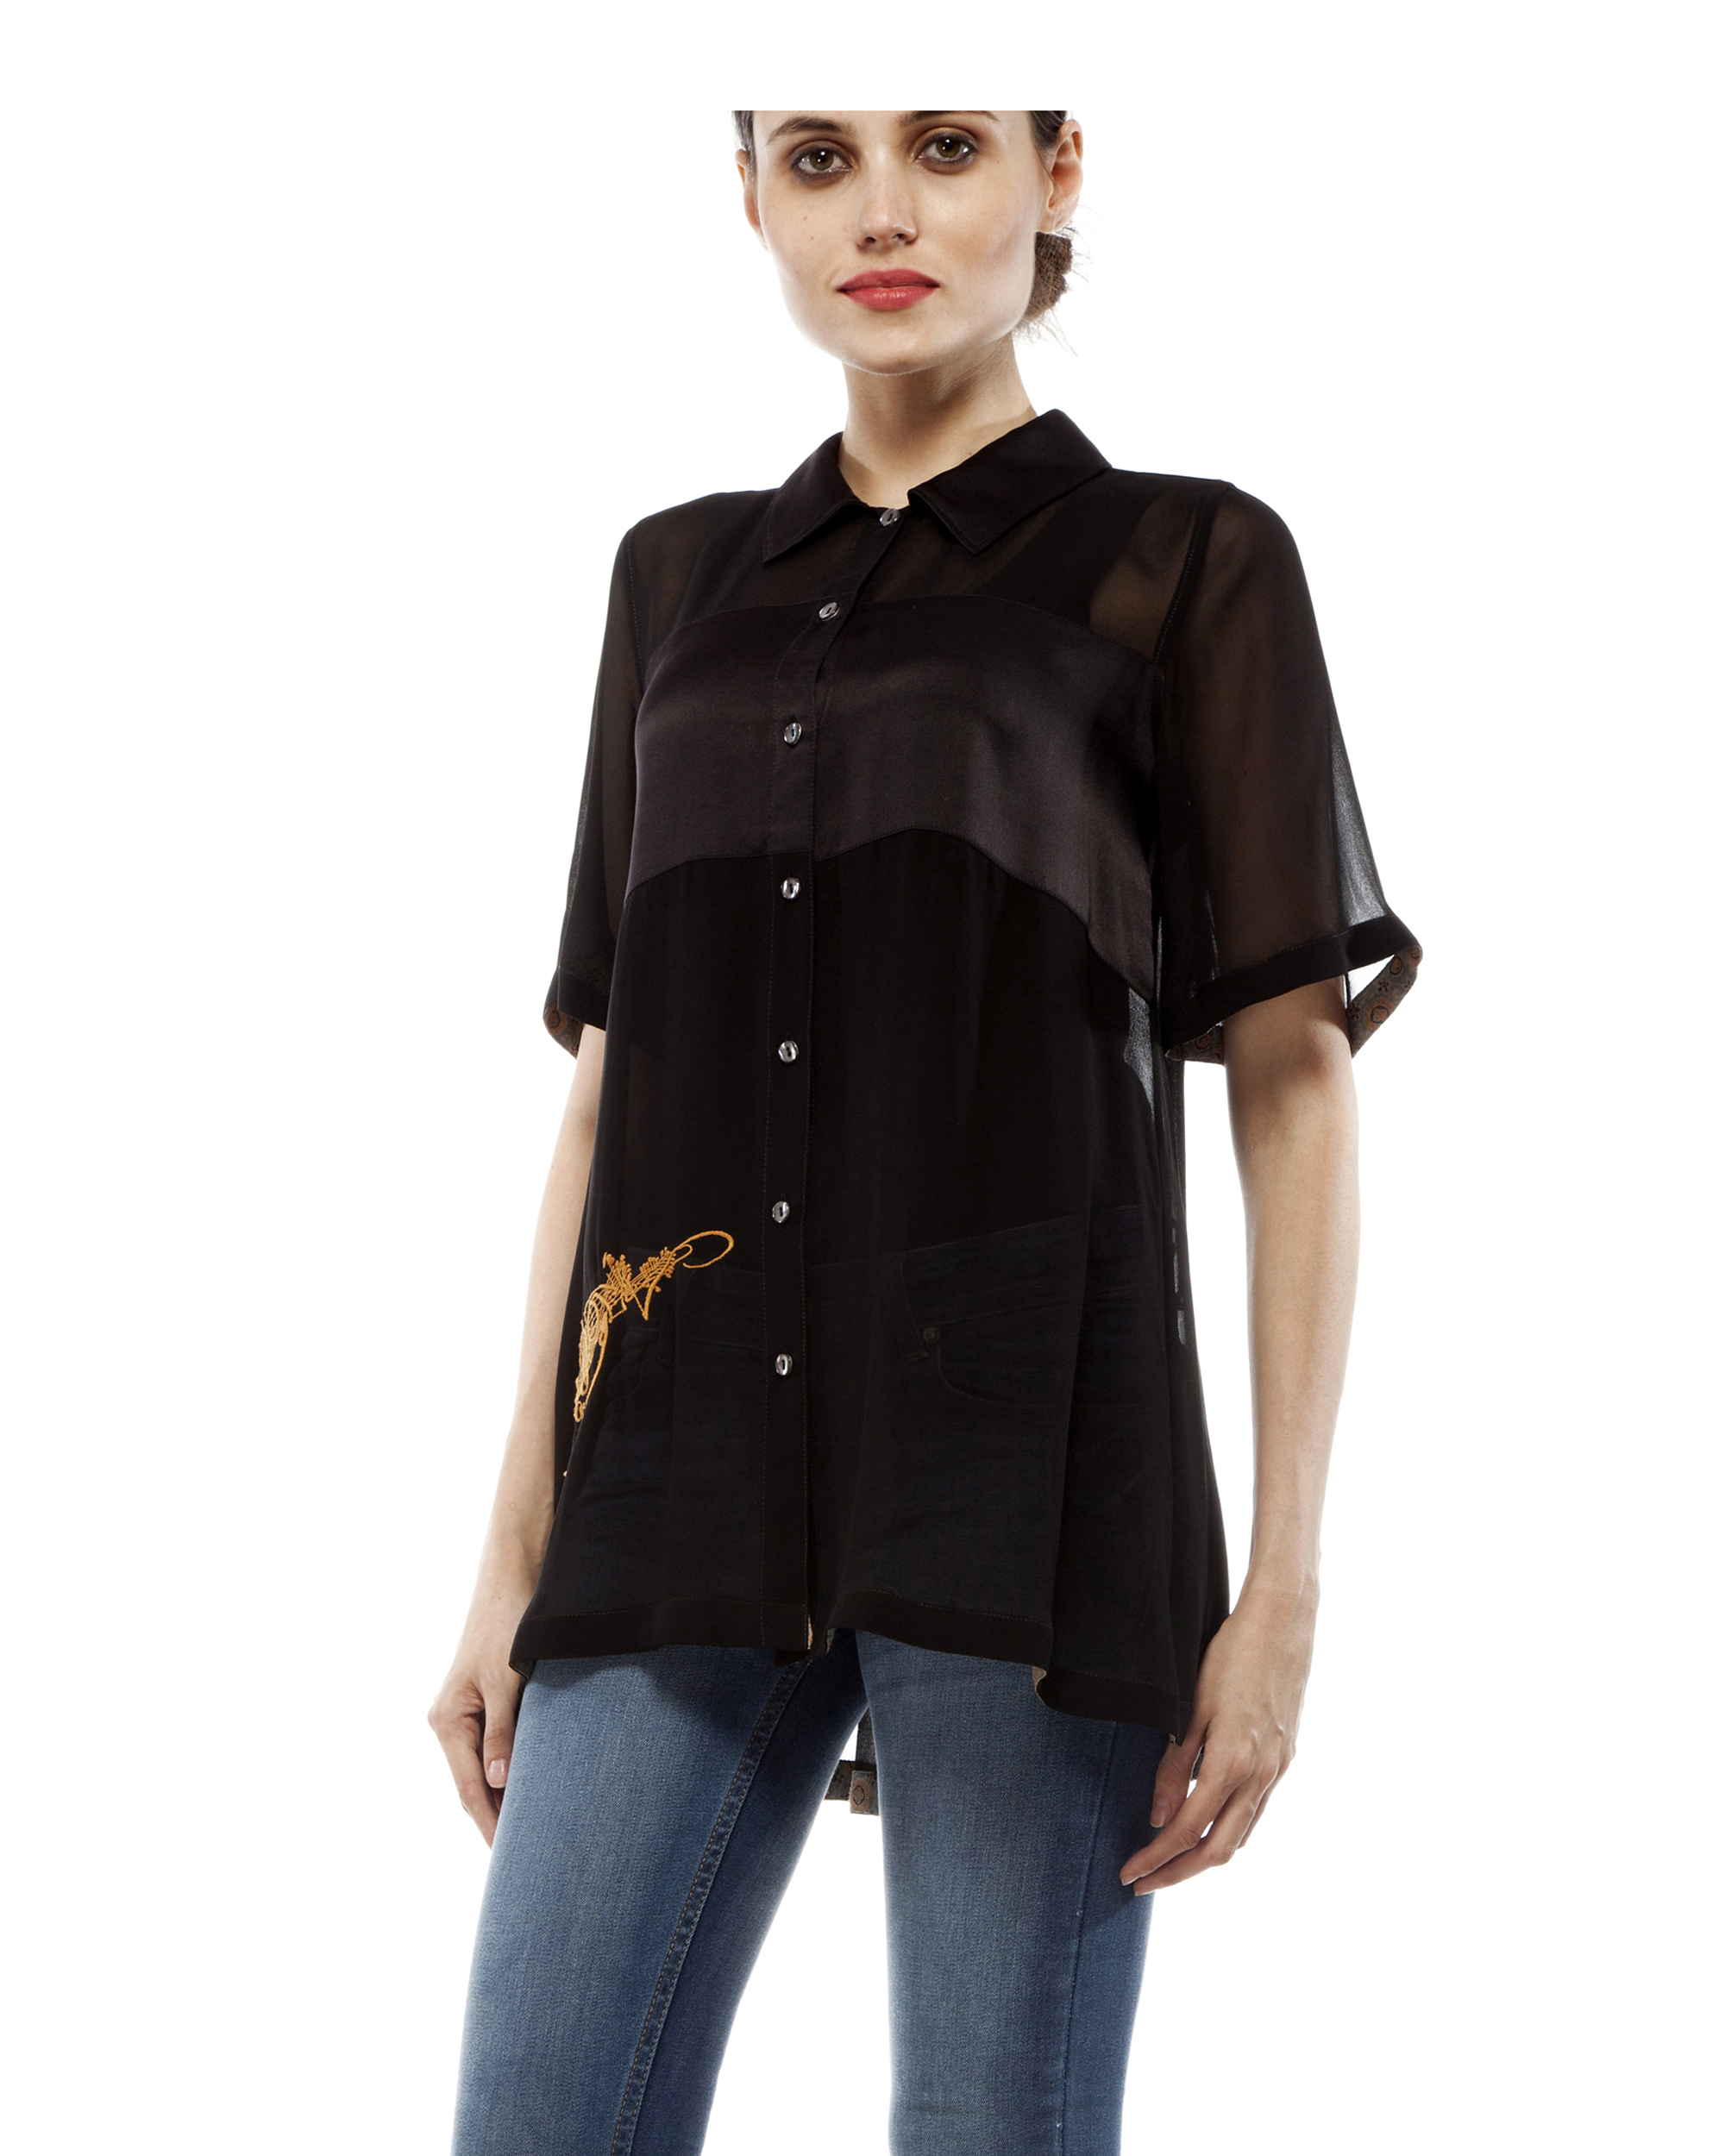 Black shirt with embroidery by Divyam Mehta | The Secret Label